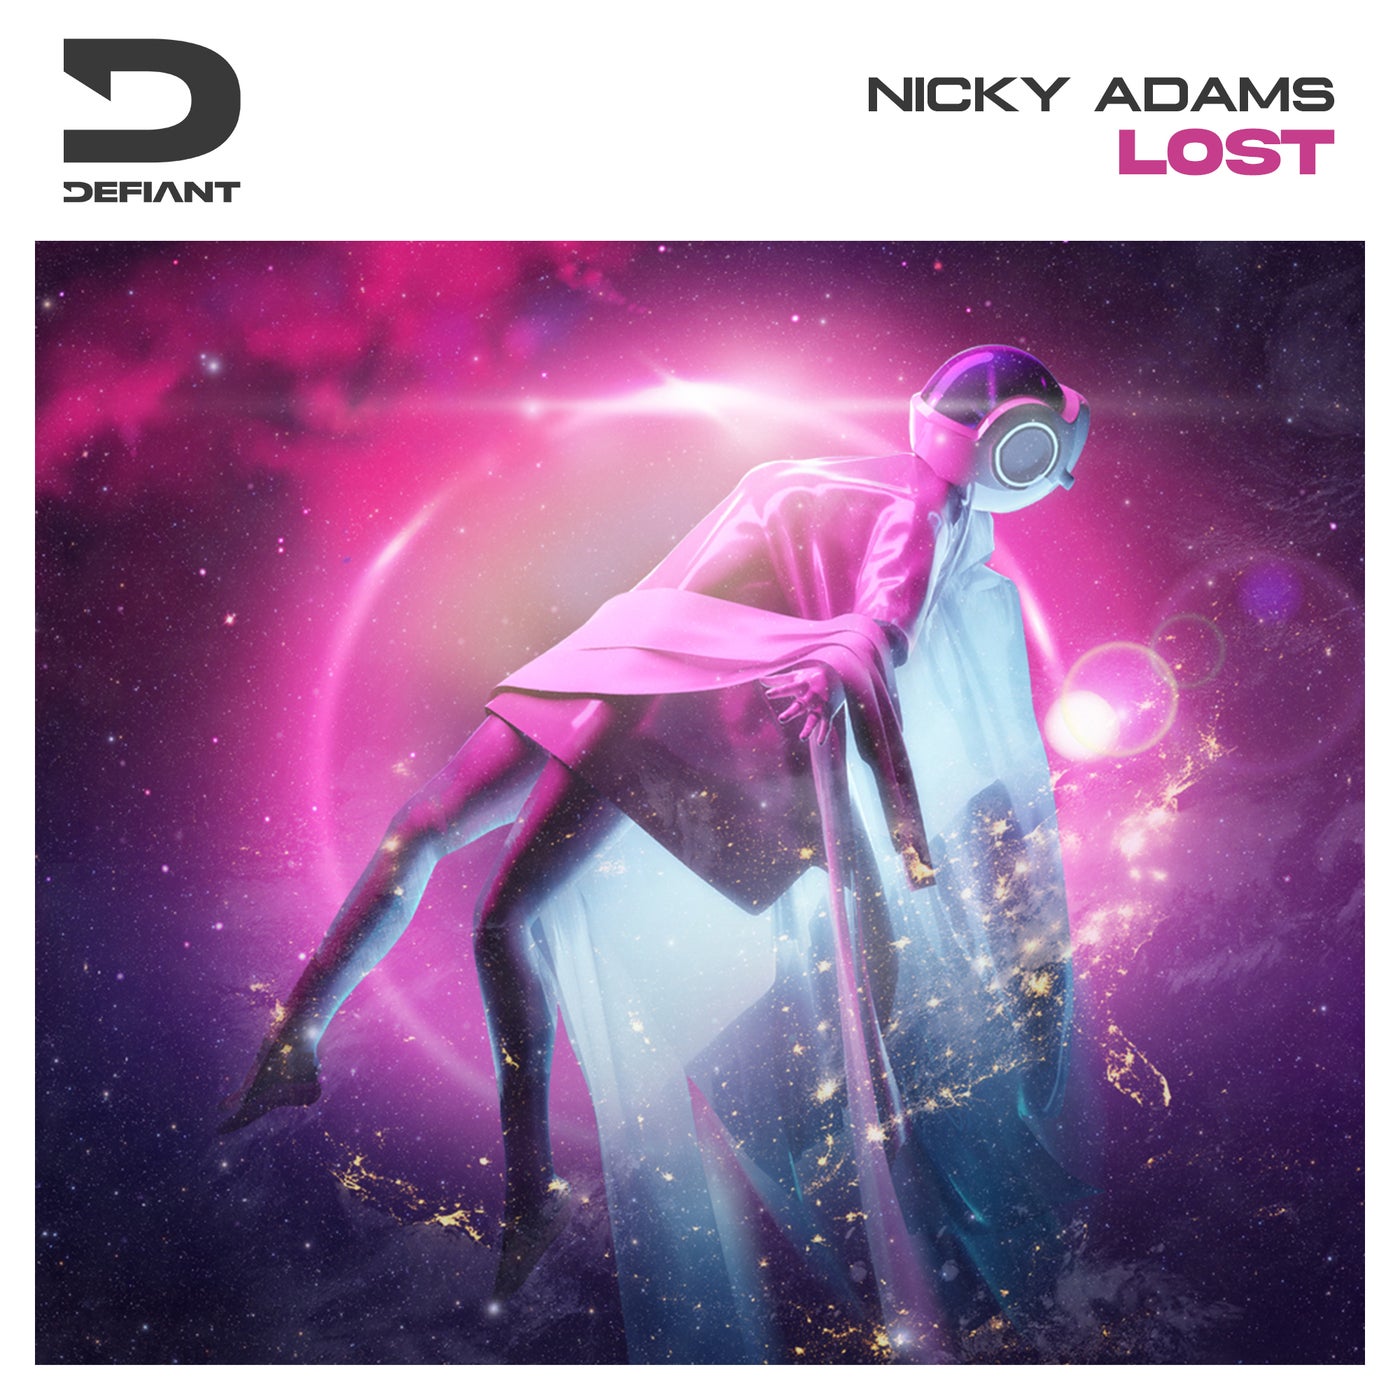 Nicky Adams Lost Defiant Digital Records Music Downloads on